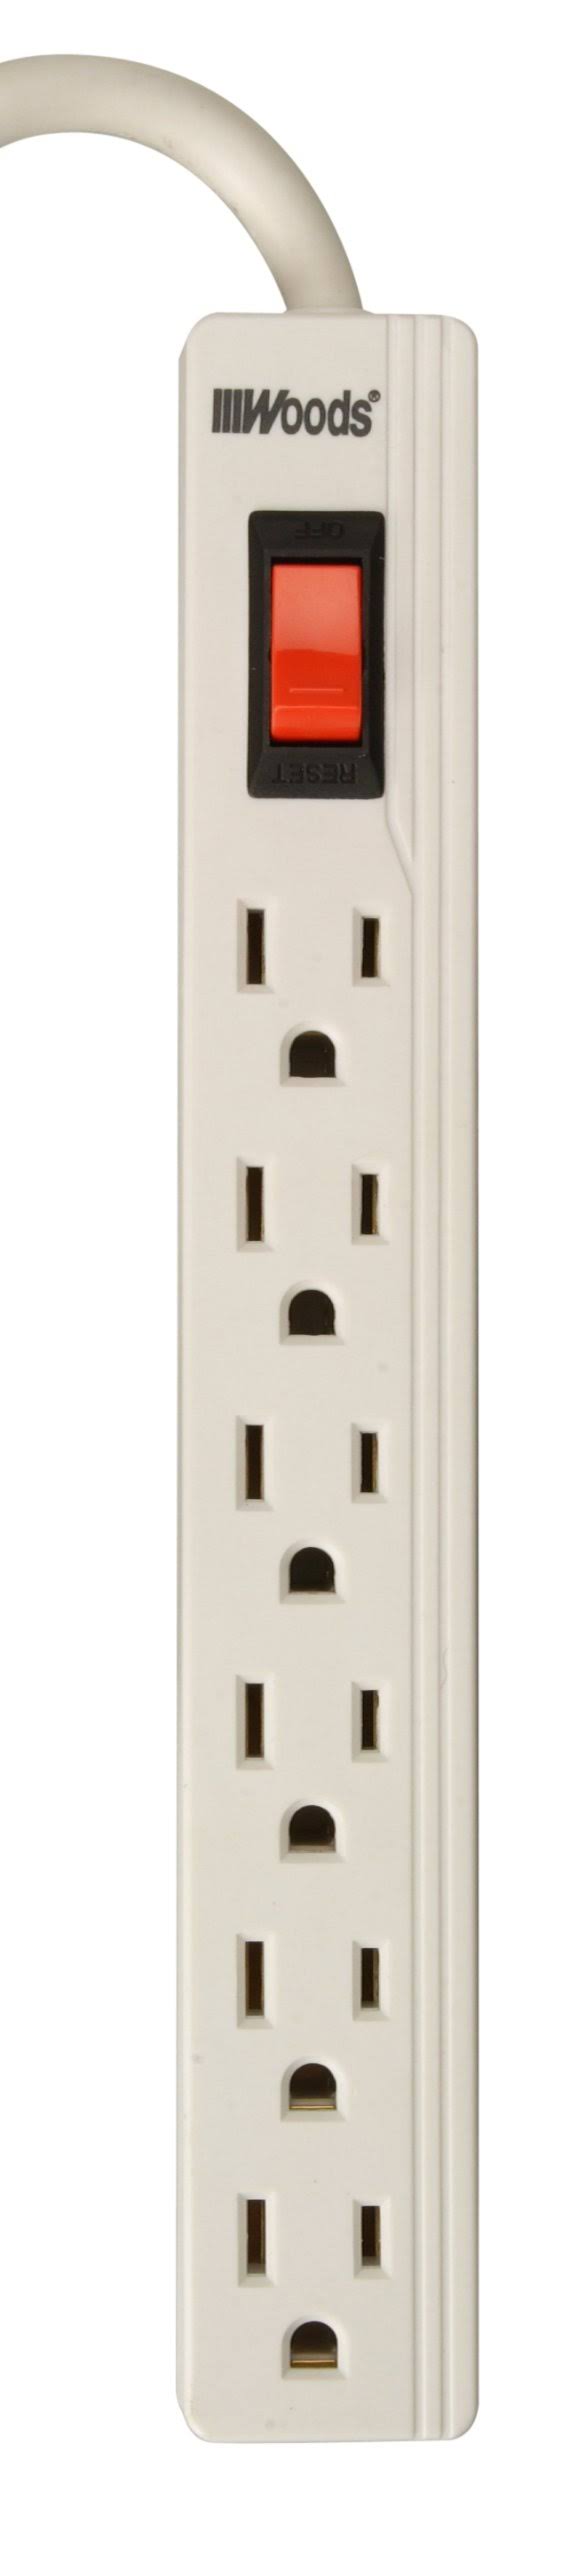 Woods Power Strip - 6 Outlet, with 1.5ft Cord, White